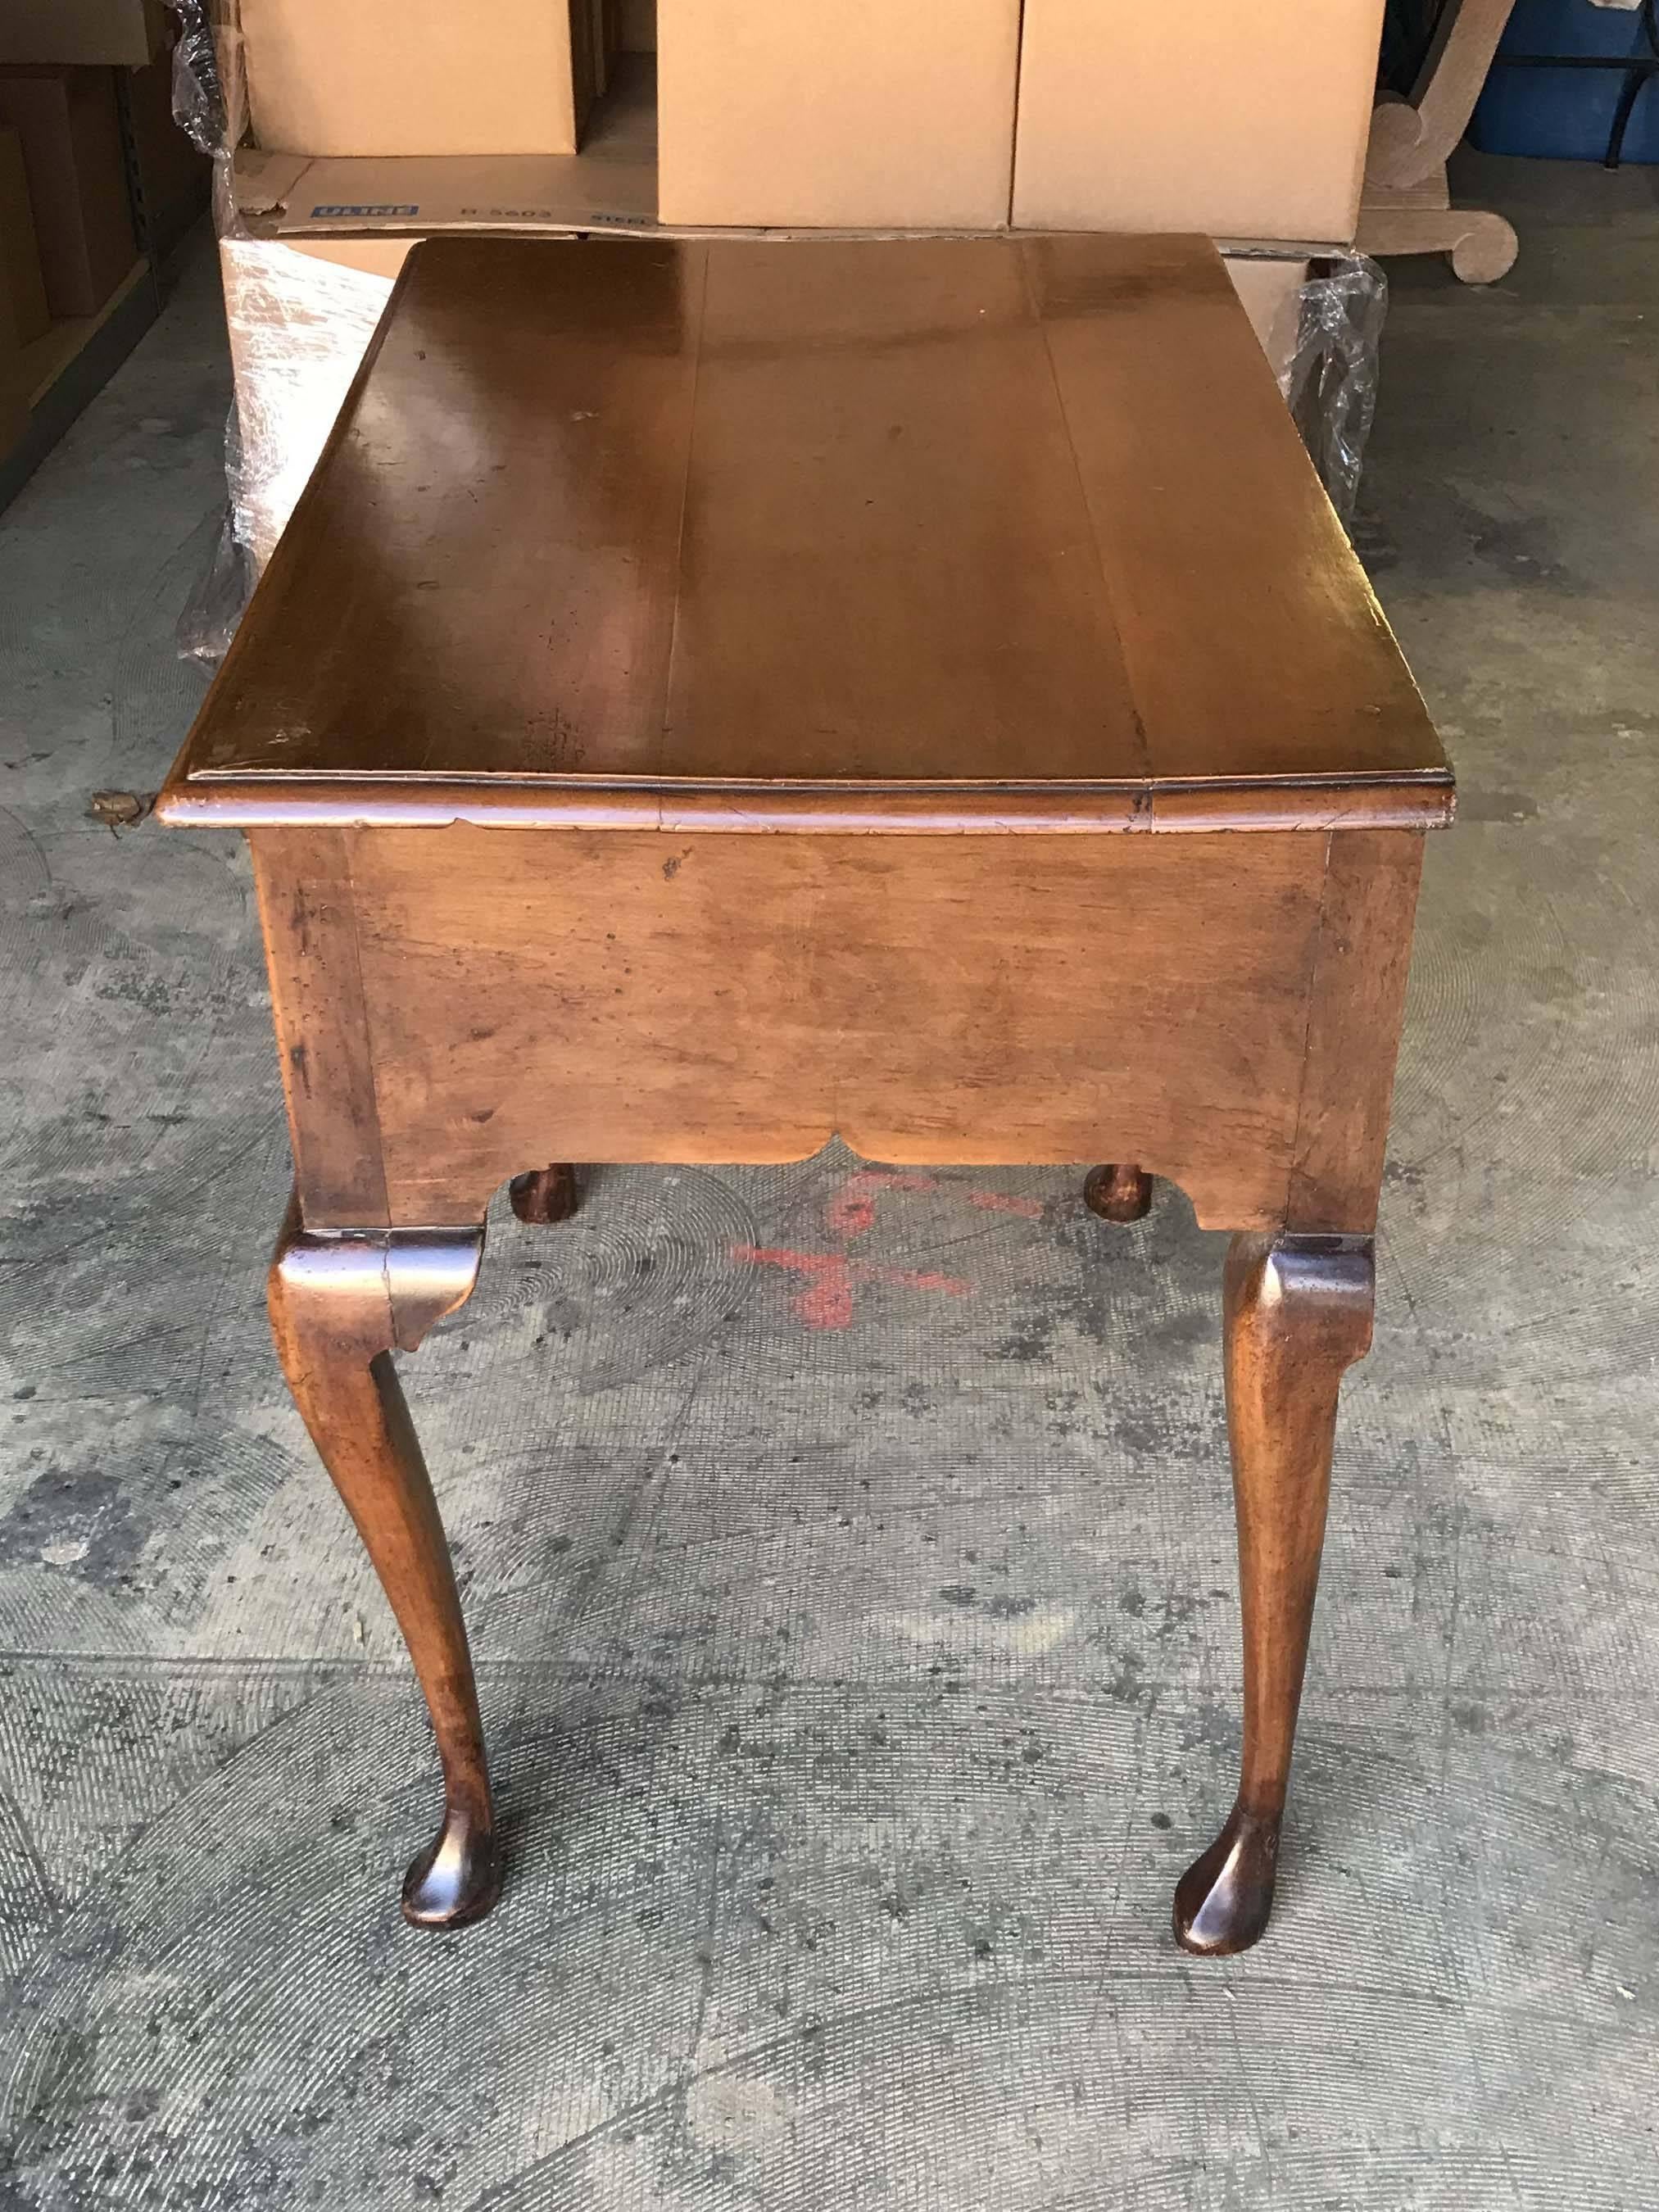 A three-drawer Queen Anne or Georgian-style lowboy with original brass mounts and functioning lock. Very good condition with minor wear consistent with age and use. Please see photos.